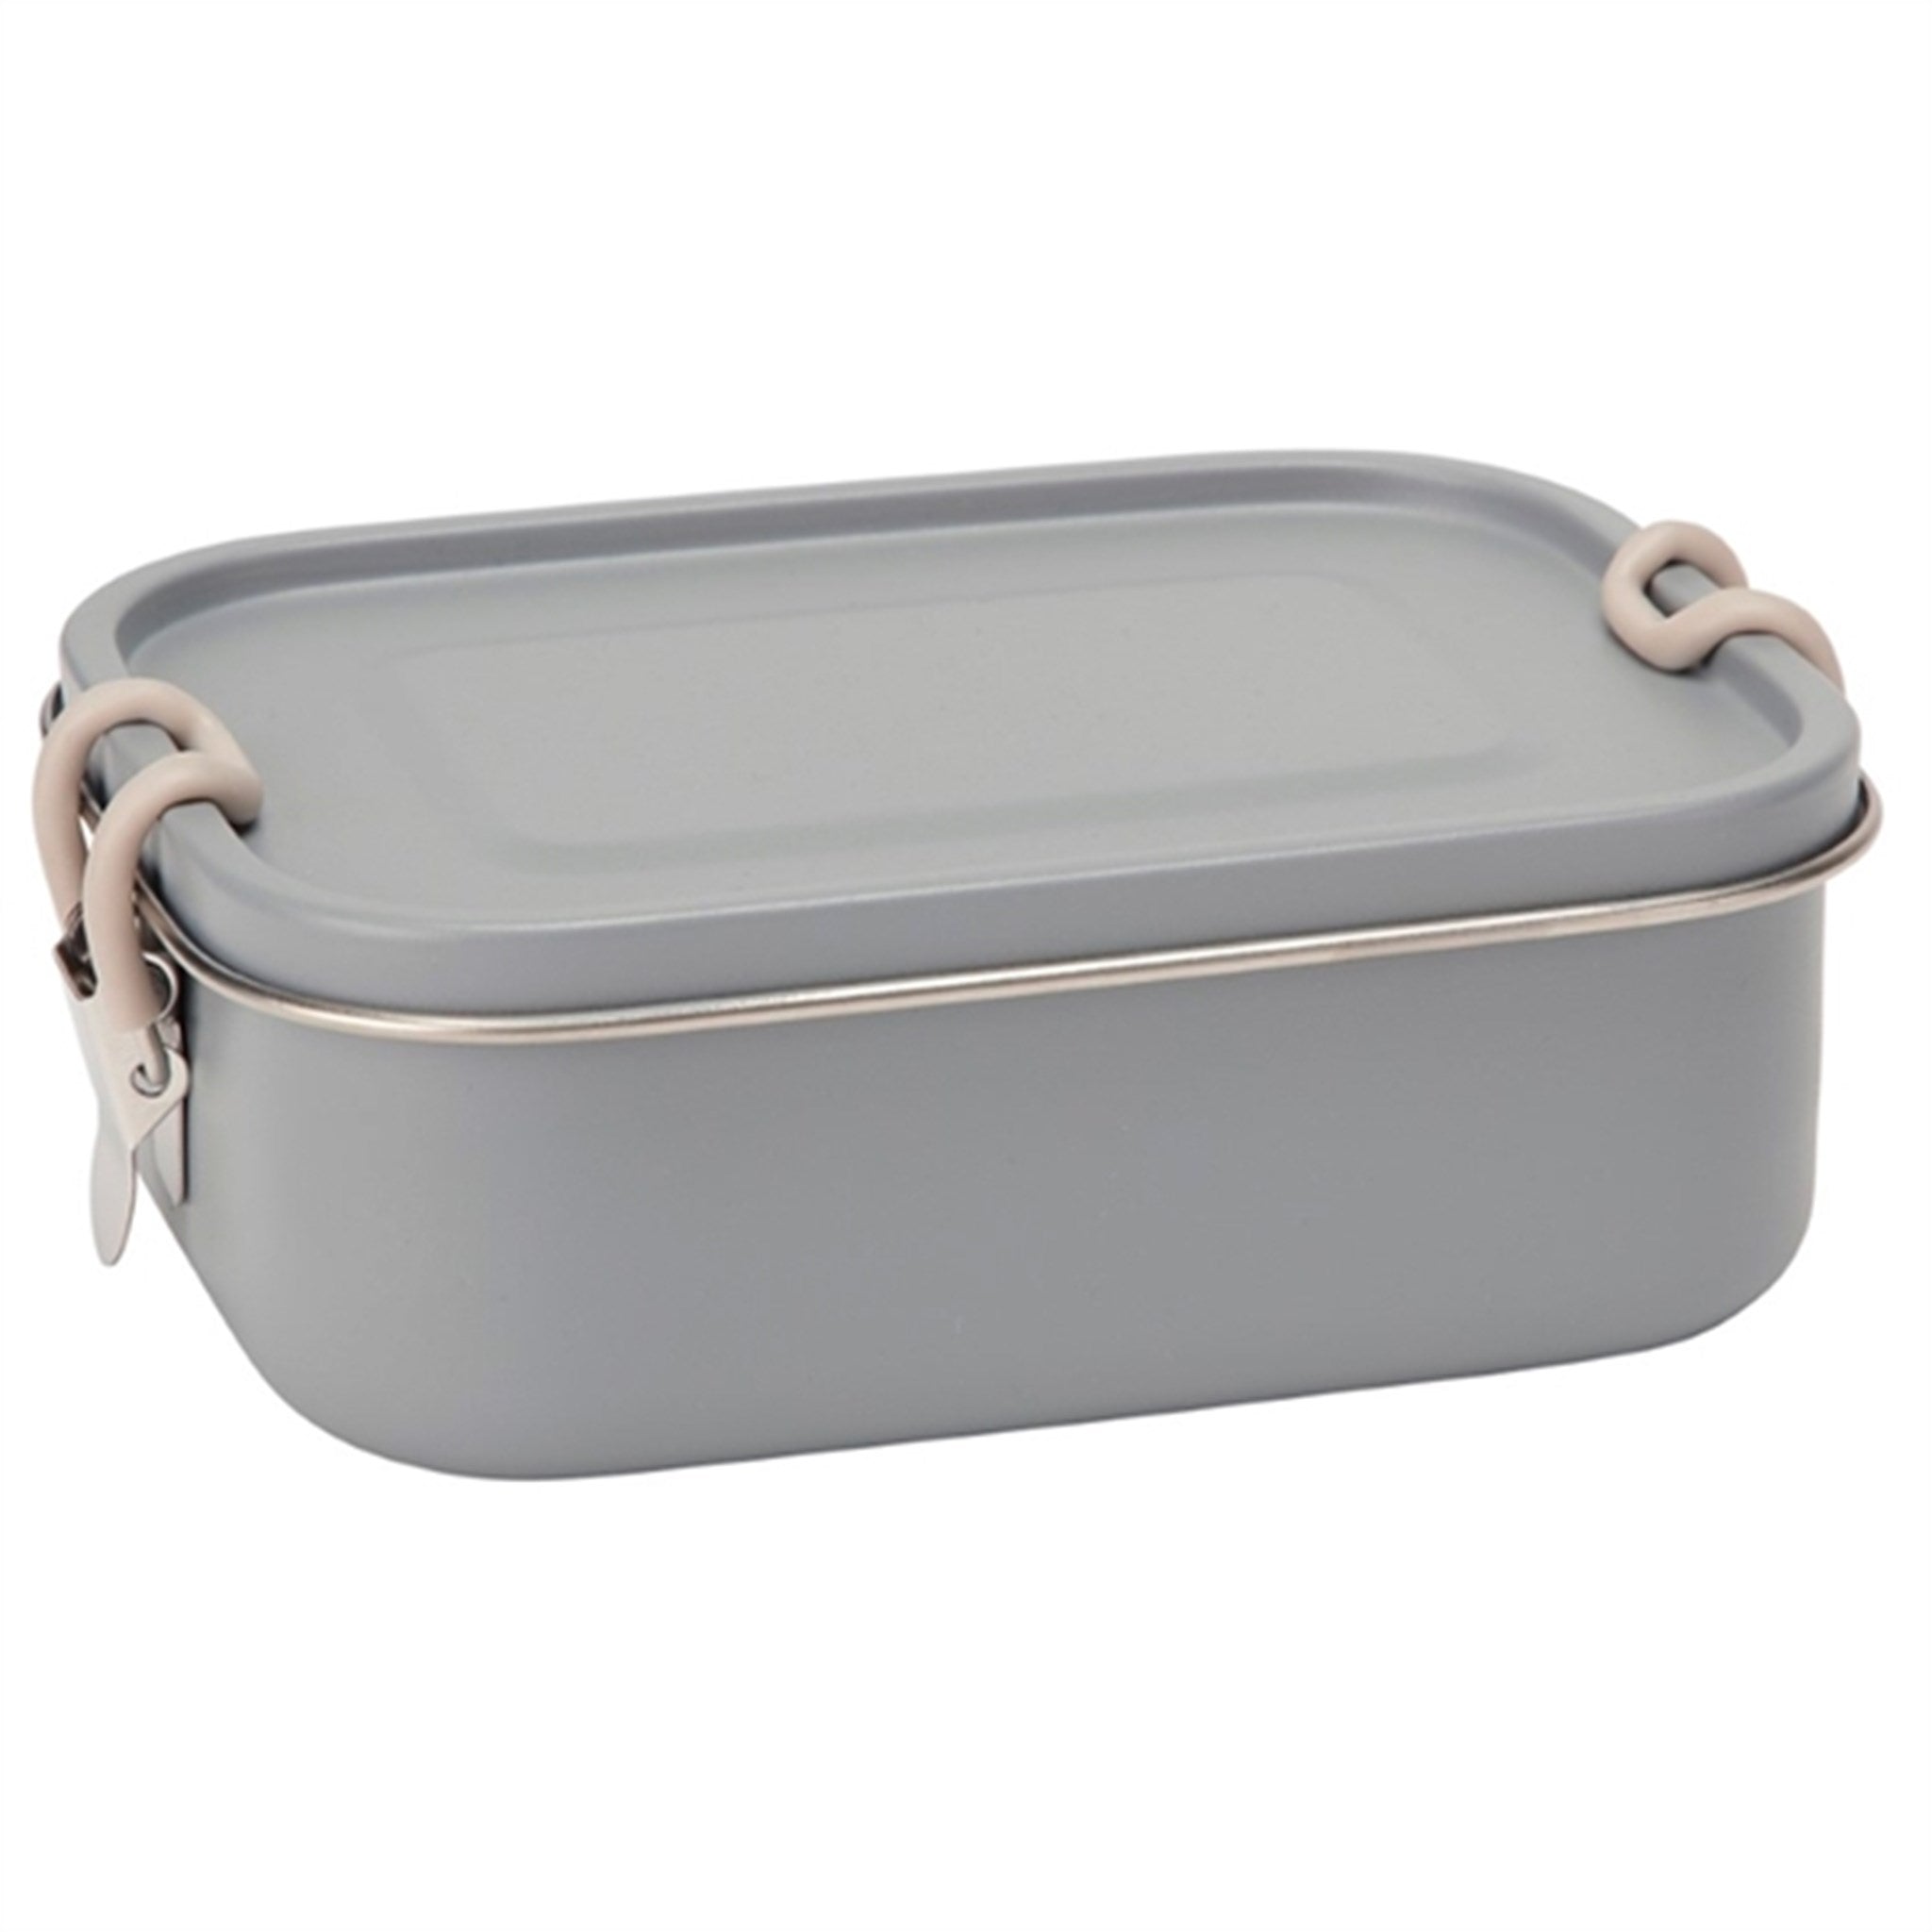 Haps Nordic Lunch Box with Removable Divider Ocean